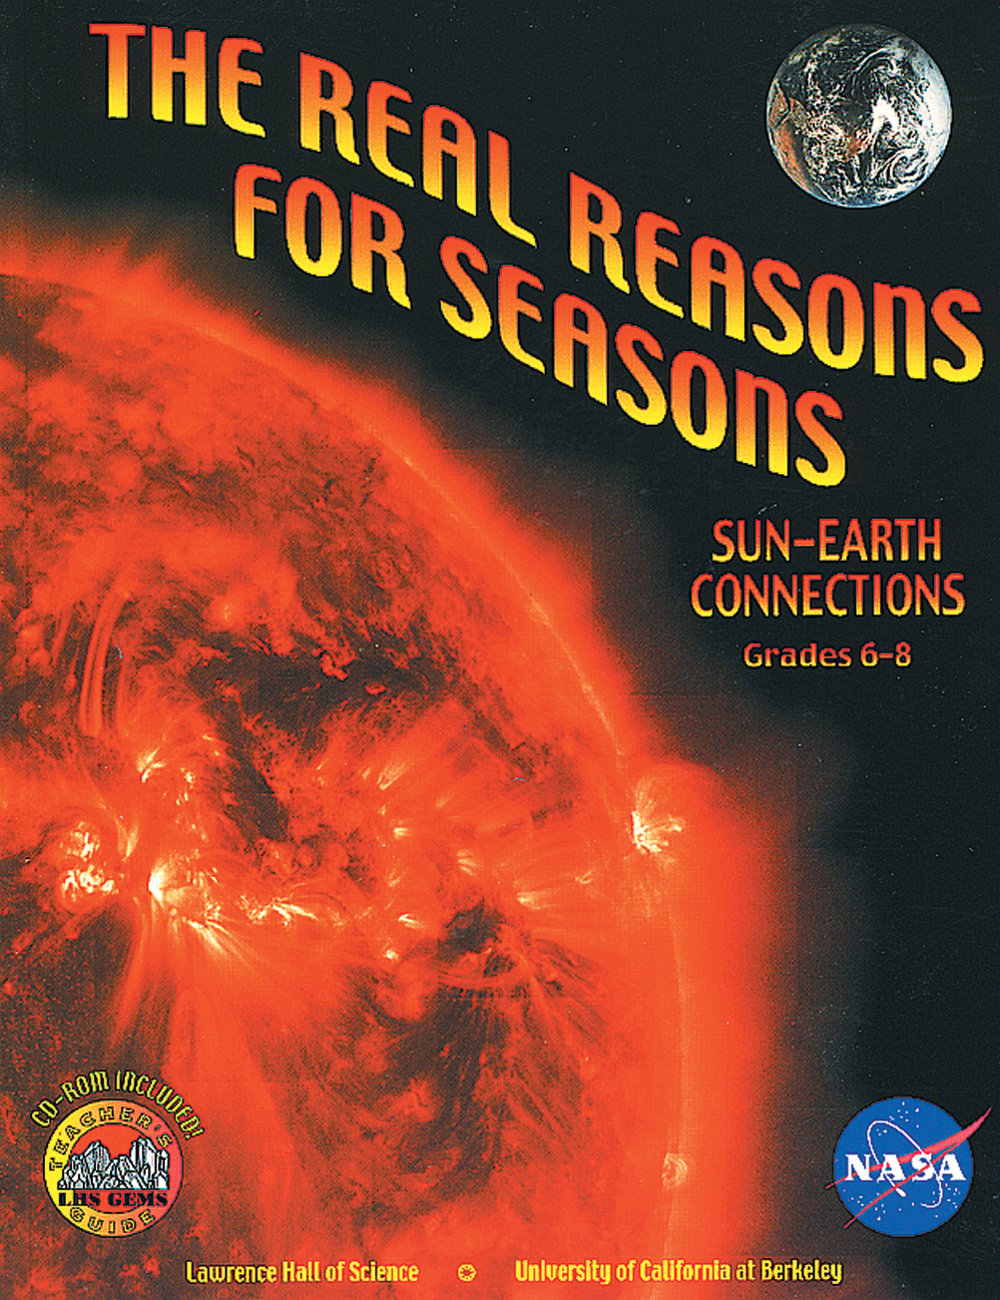 Real Reasons for Seasons (The): Sun-Earth Connections (GEMS)